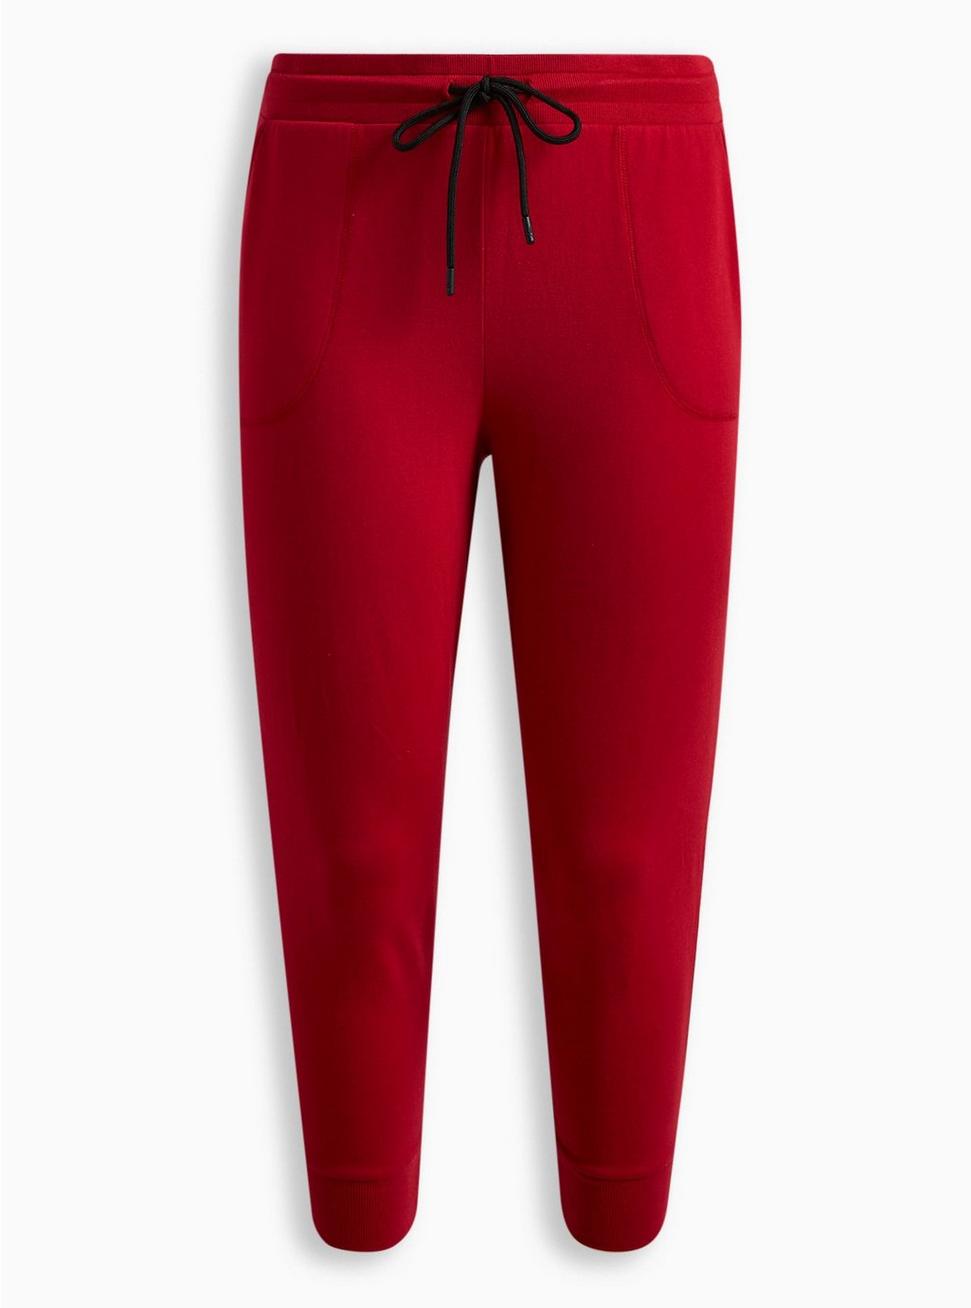 Everyday Fleece Crop Active Jogger In Classic Fit, JESTER RED, hi-res